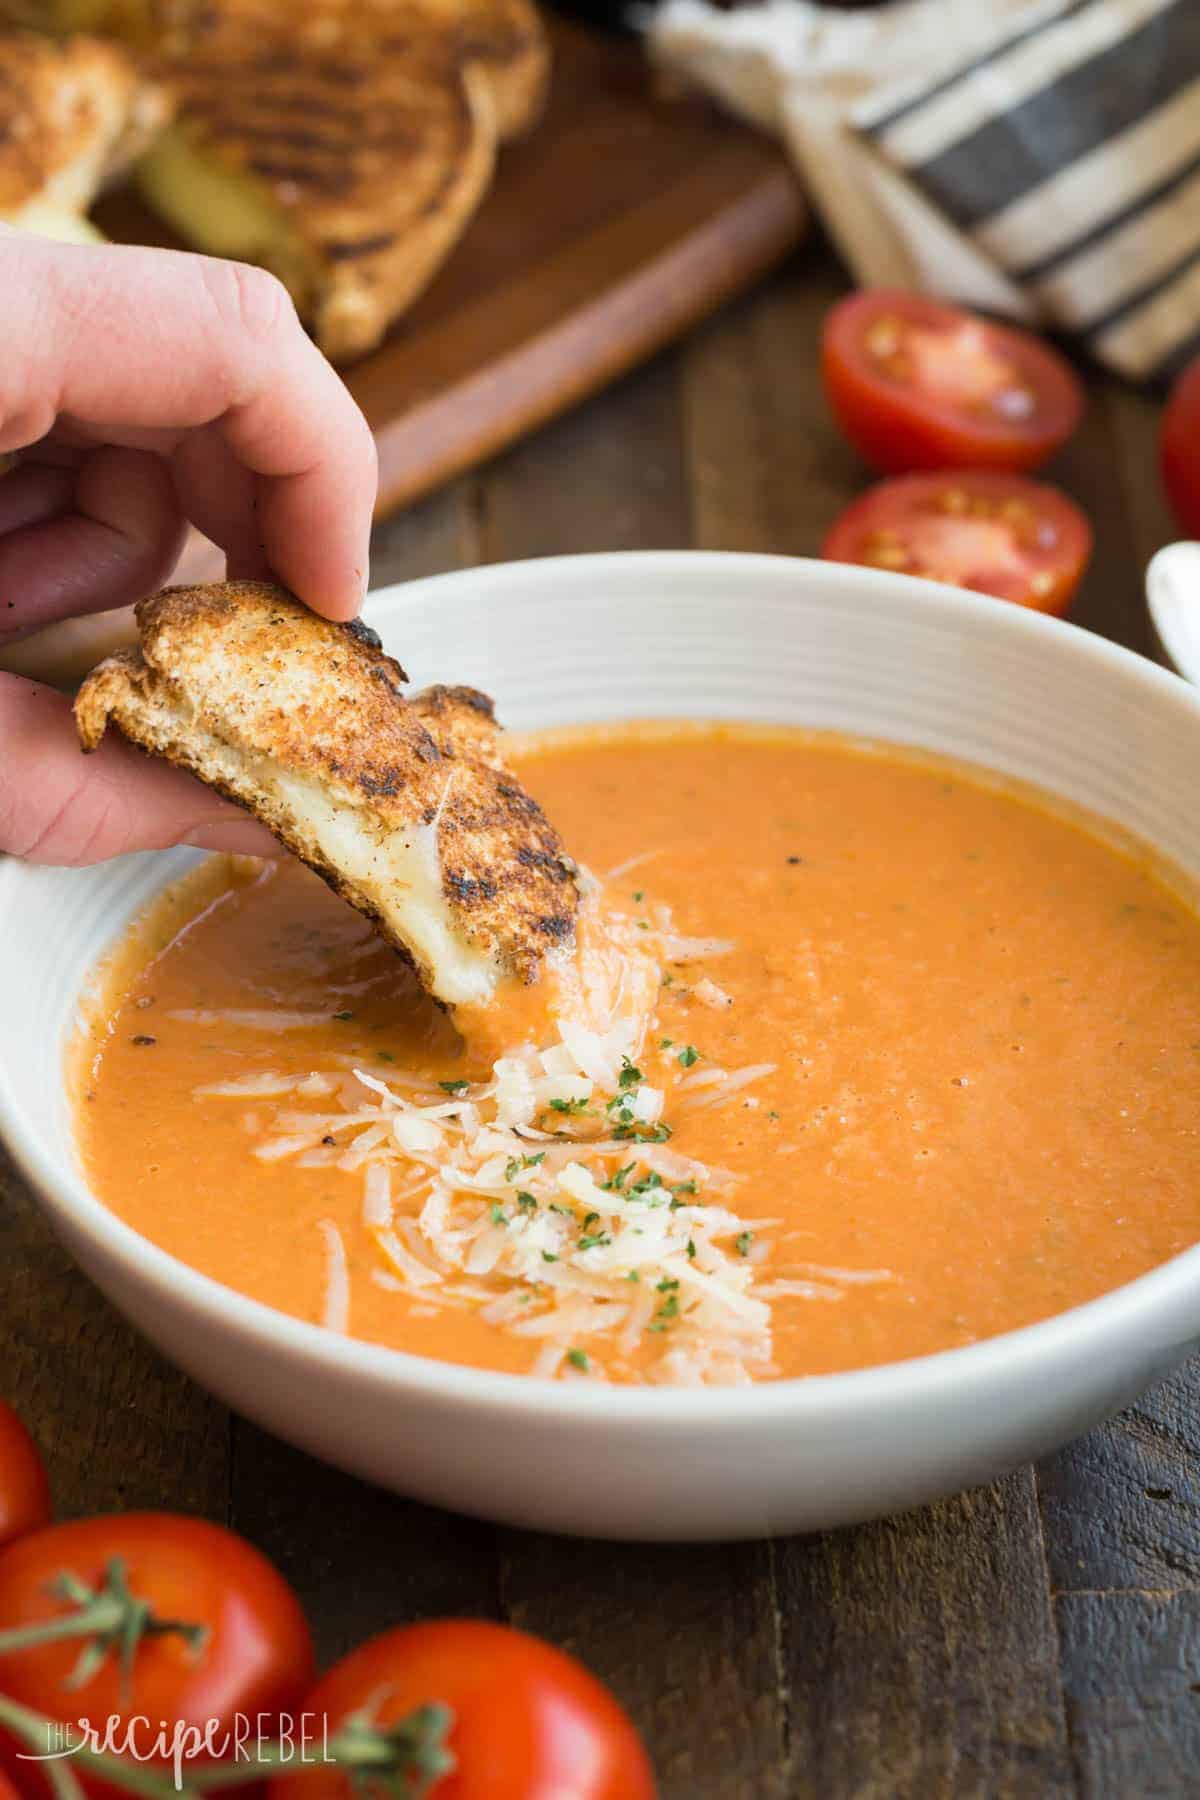 Easy Roasted Tomato Soup Recipe + VIDEO